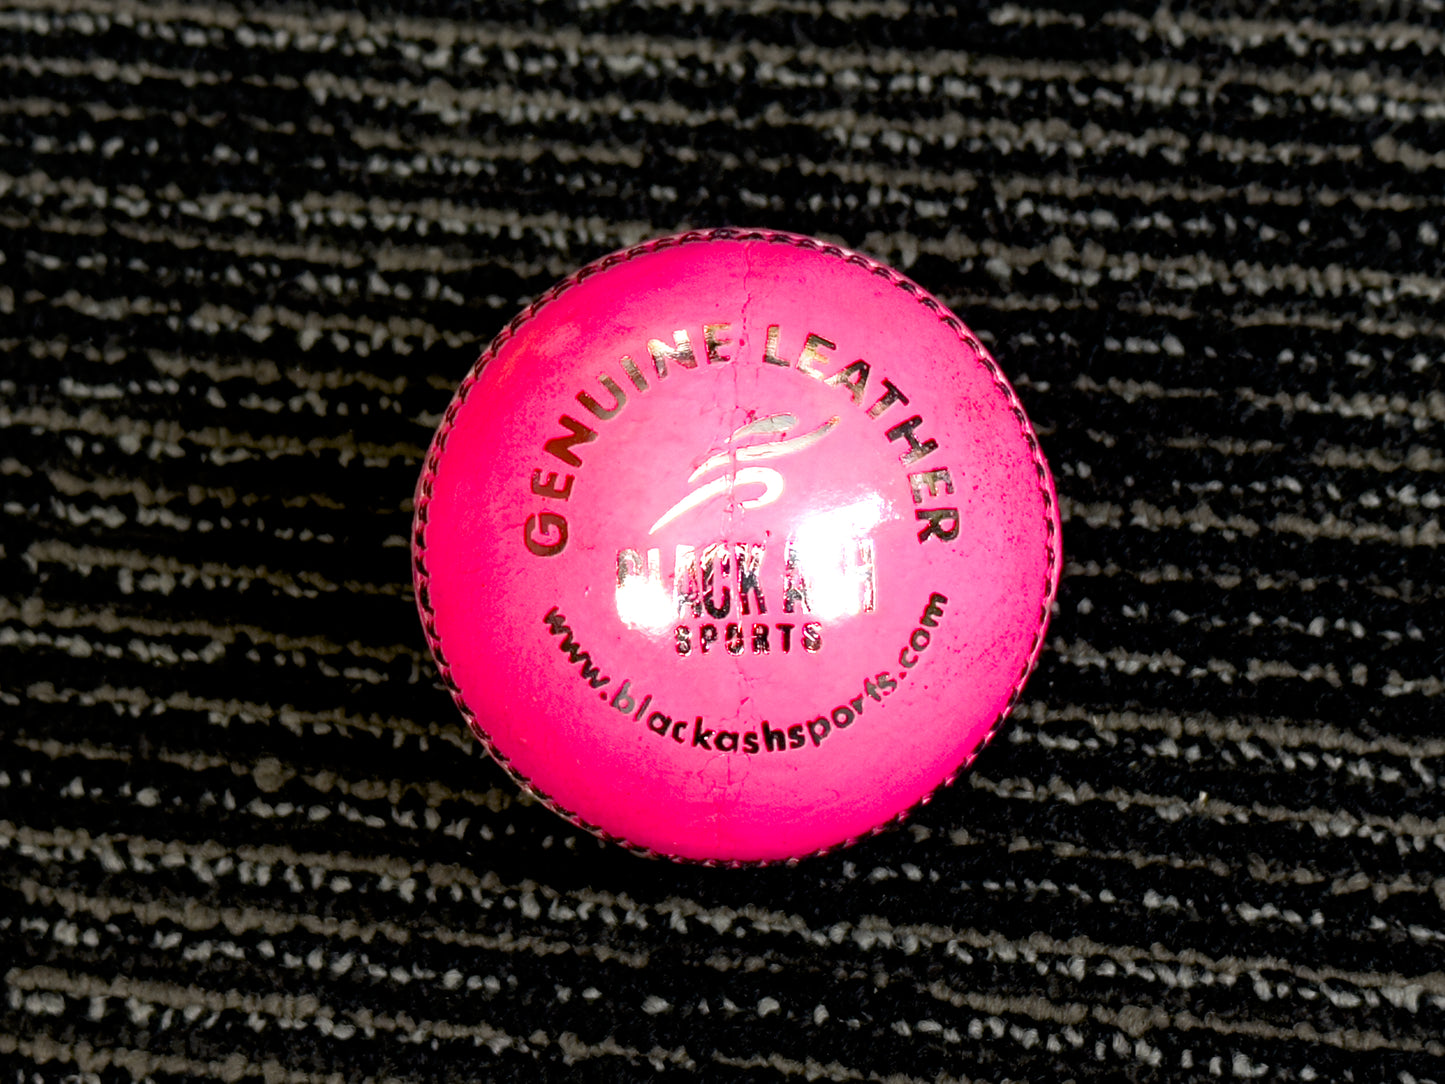 Pack of 6 pink Black Ash Seamer cricket leather balls, premium quality, 156 grams each, suitable for practice and T20 cricket, featuring 4-piece construction and excellent shape retention, machine stitched according to MCC regulations.